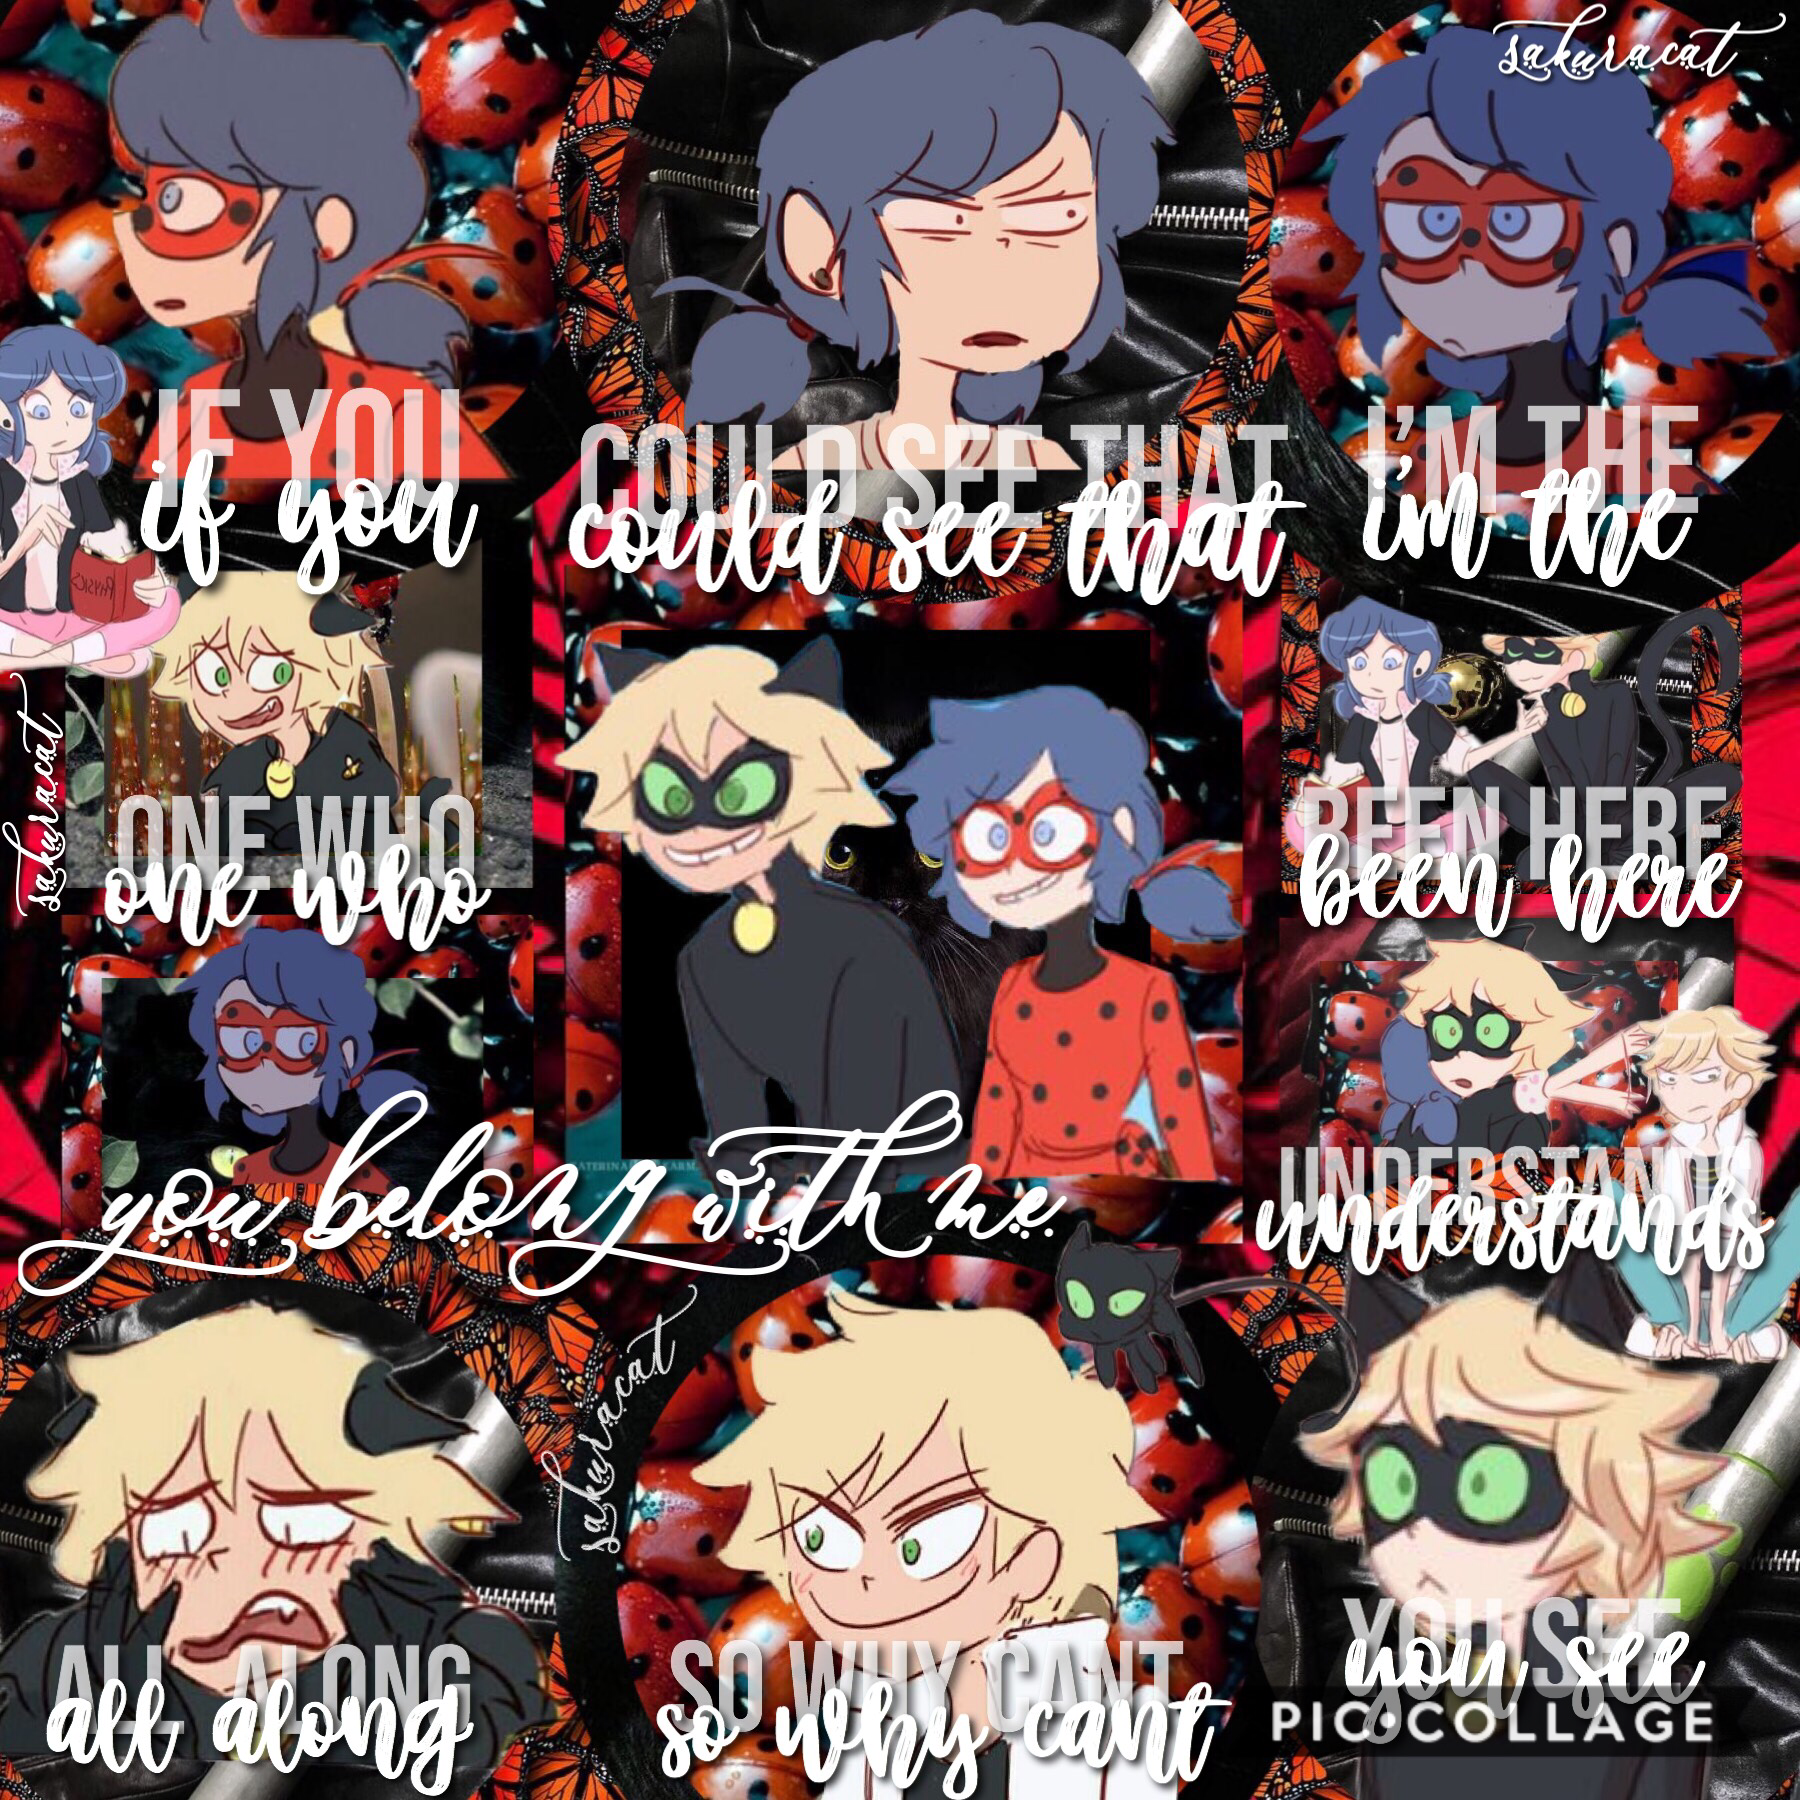 Tap
Here’s a long-awaited Miraculous collage made from fanart 
Chat is adorable 
QOTD: collage with most likes (not counting featured ones) AOTD: 150 likes on the Snape collage 😂 HOW DID THAT HAPPEN
Um someone chat with me
OK THAT’S ABOUT IT 
BYEEE